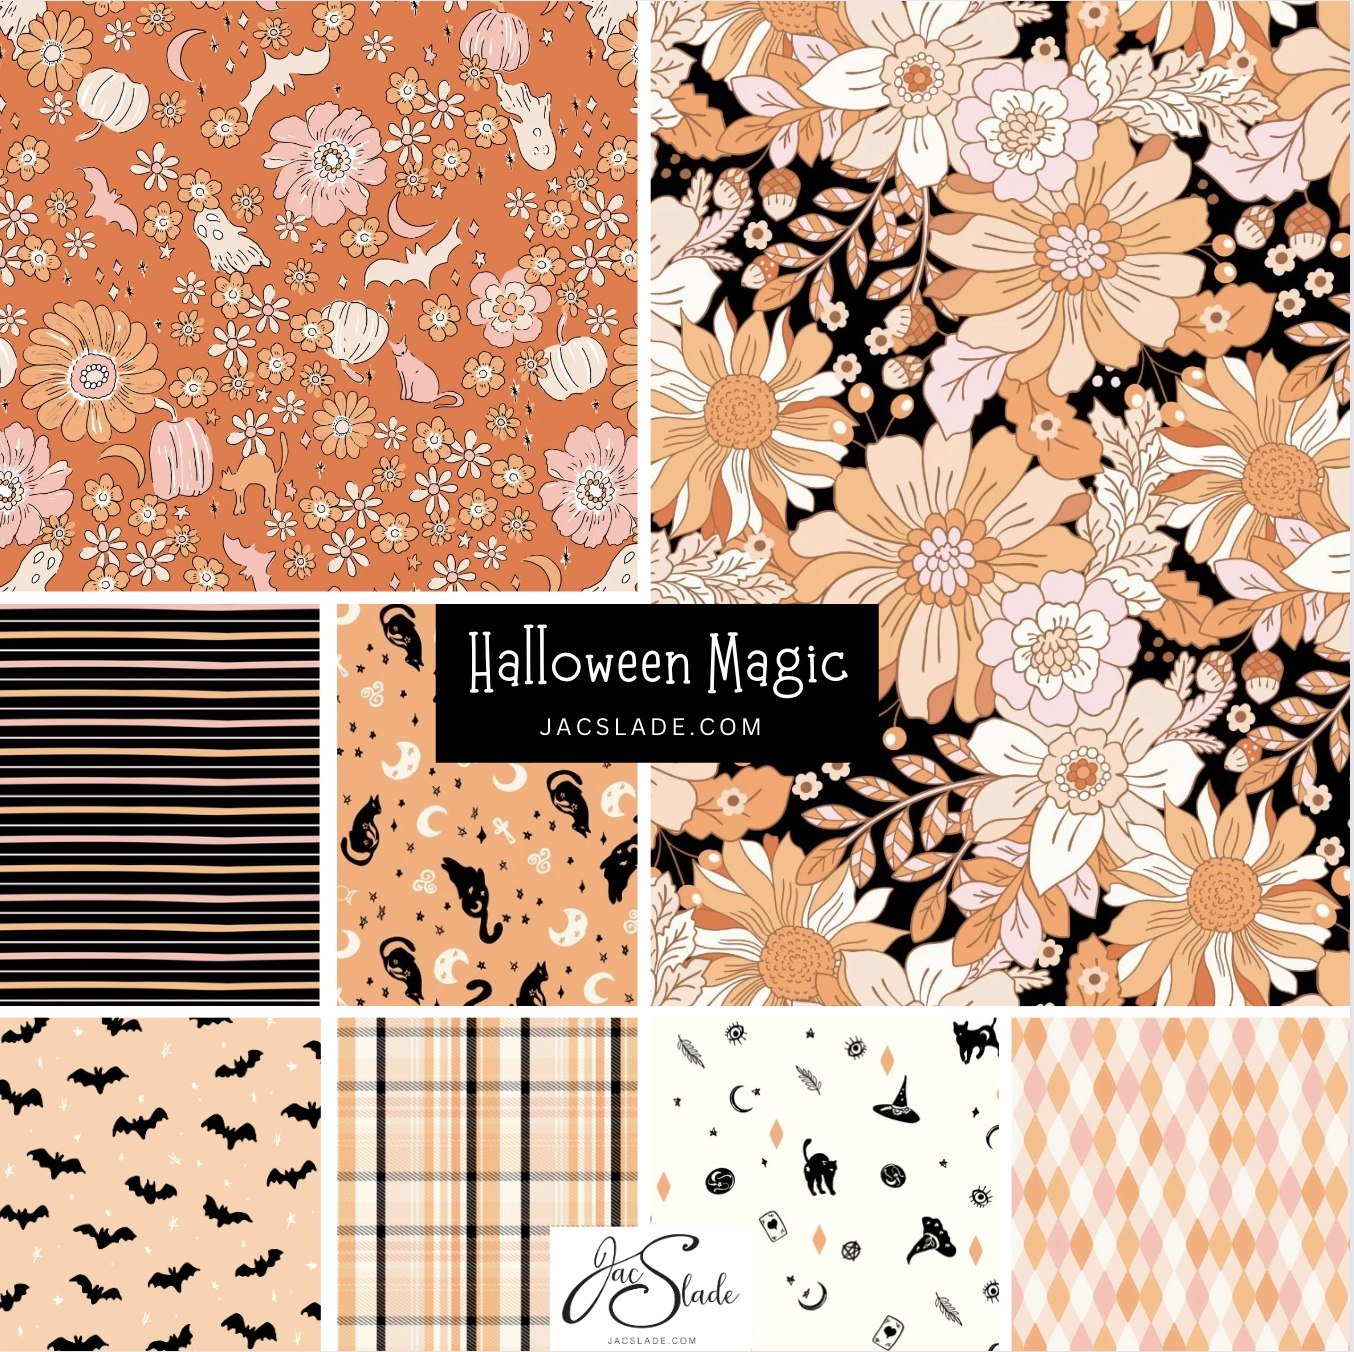 Halloween Magic.
🎃🌼👻
I'm super excited for this collection it's filled with lots of retro florals, cute ghosts, black cats, bats and fall plaids. 
Available for art licensing and at my fabric retailers.
With lots of colours to mix and match it's b